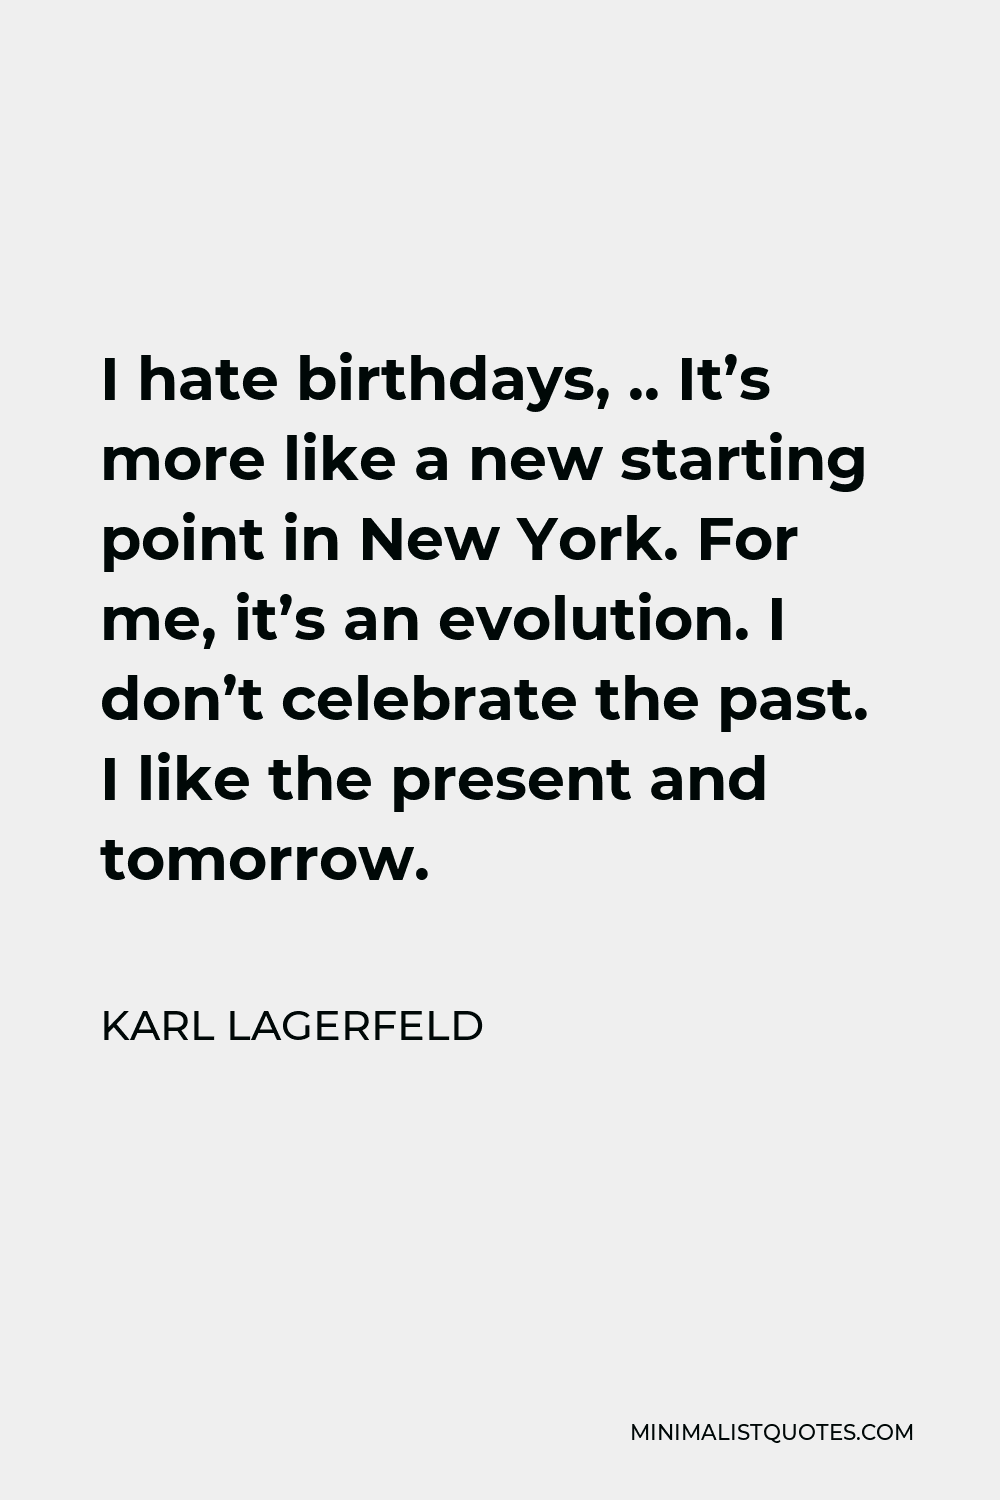 Karl Lagerfeld Quote - I hate birthdays, .. It’s more like a new starting point in New York. For me, it’s an evolution. I don’t celebrate the past. I like the present and tomorrow.